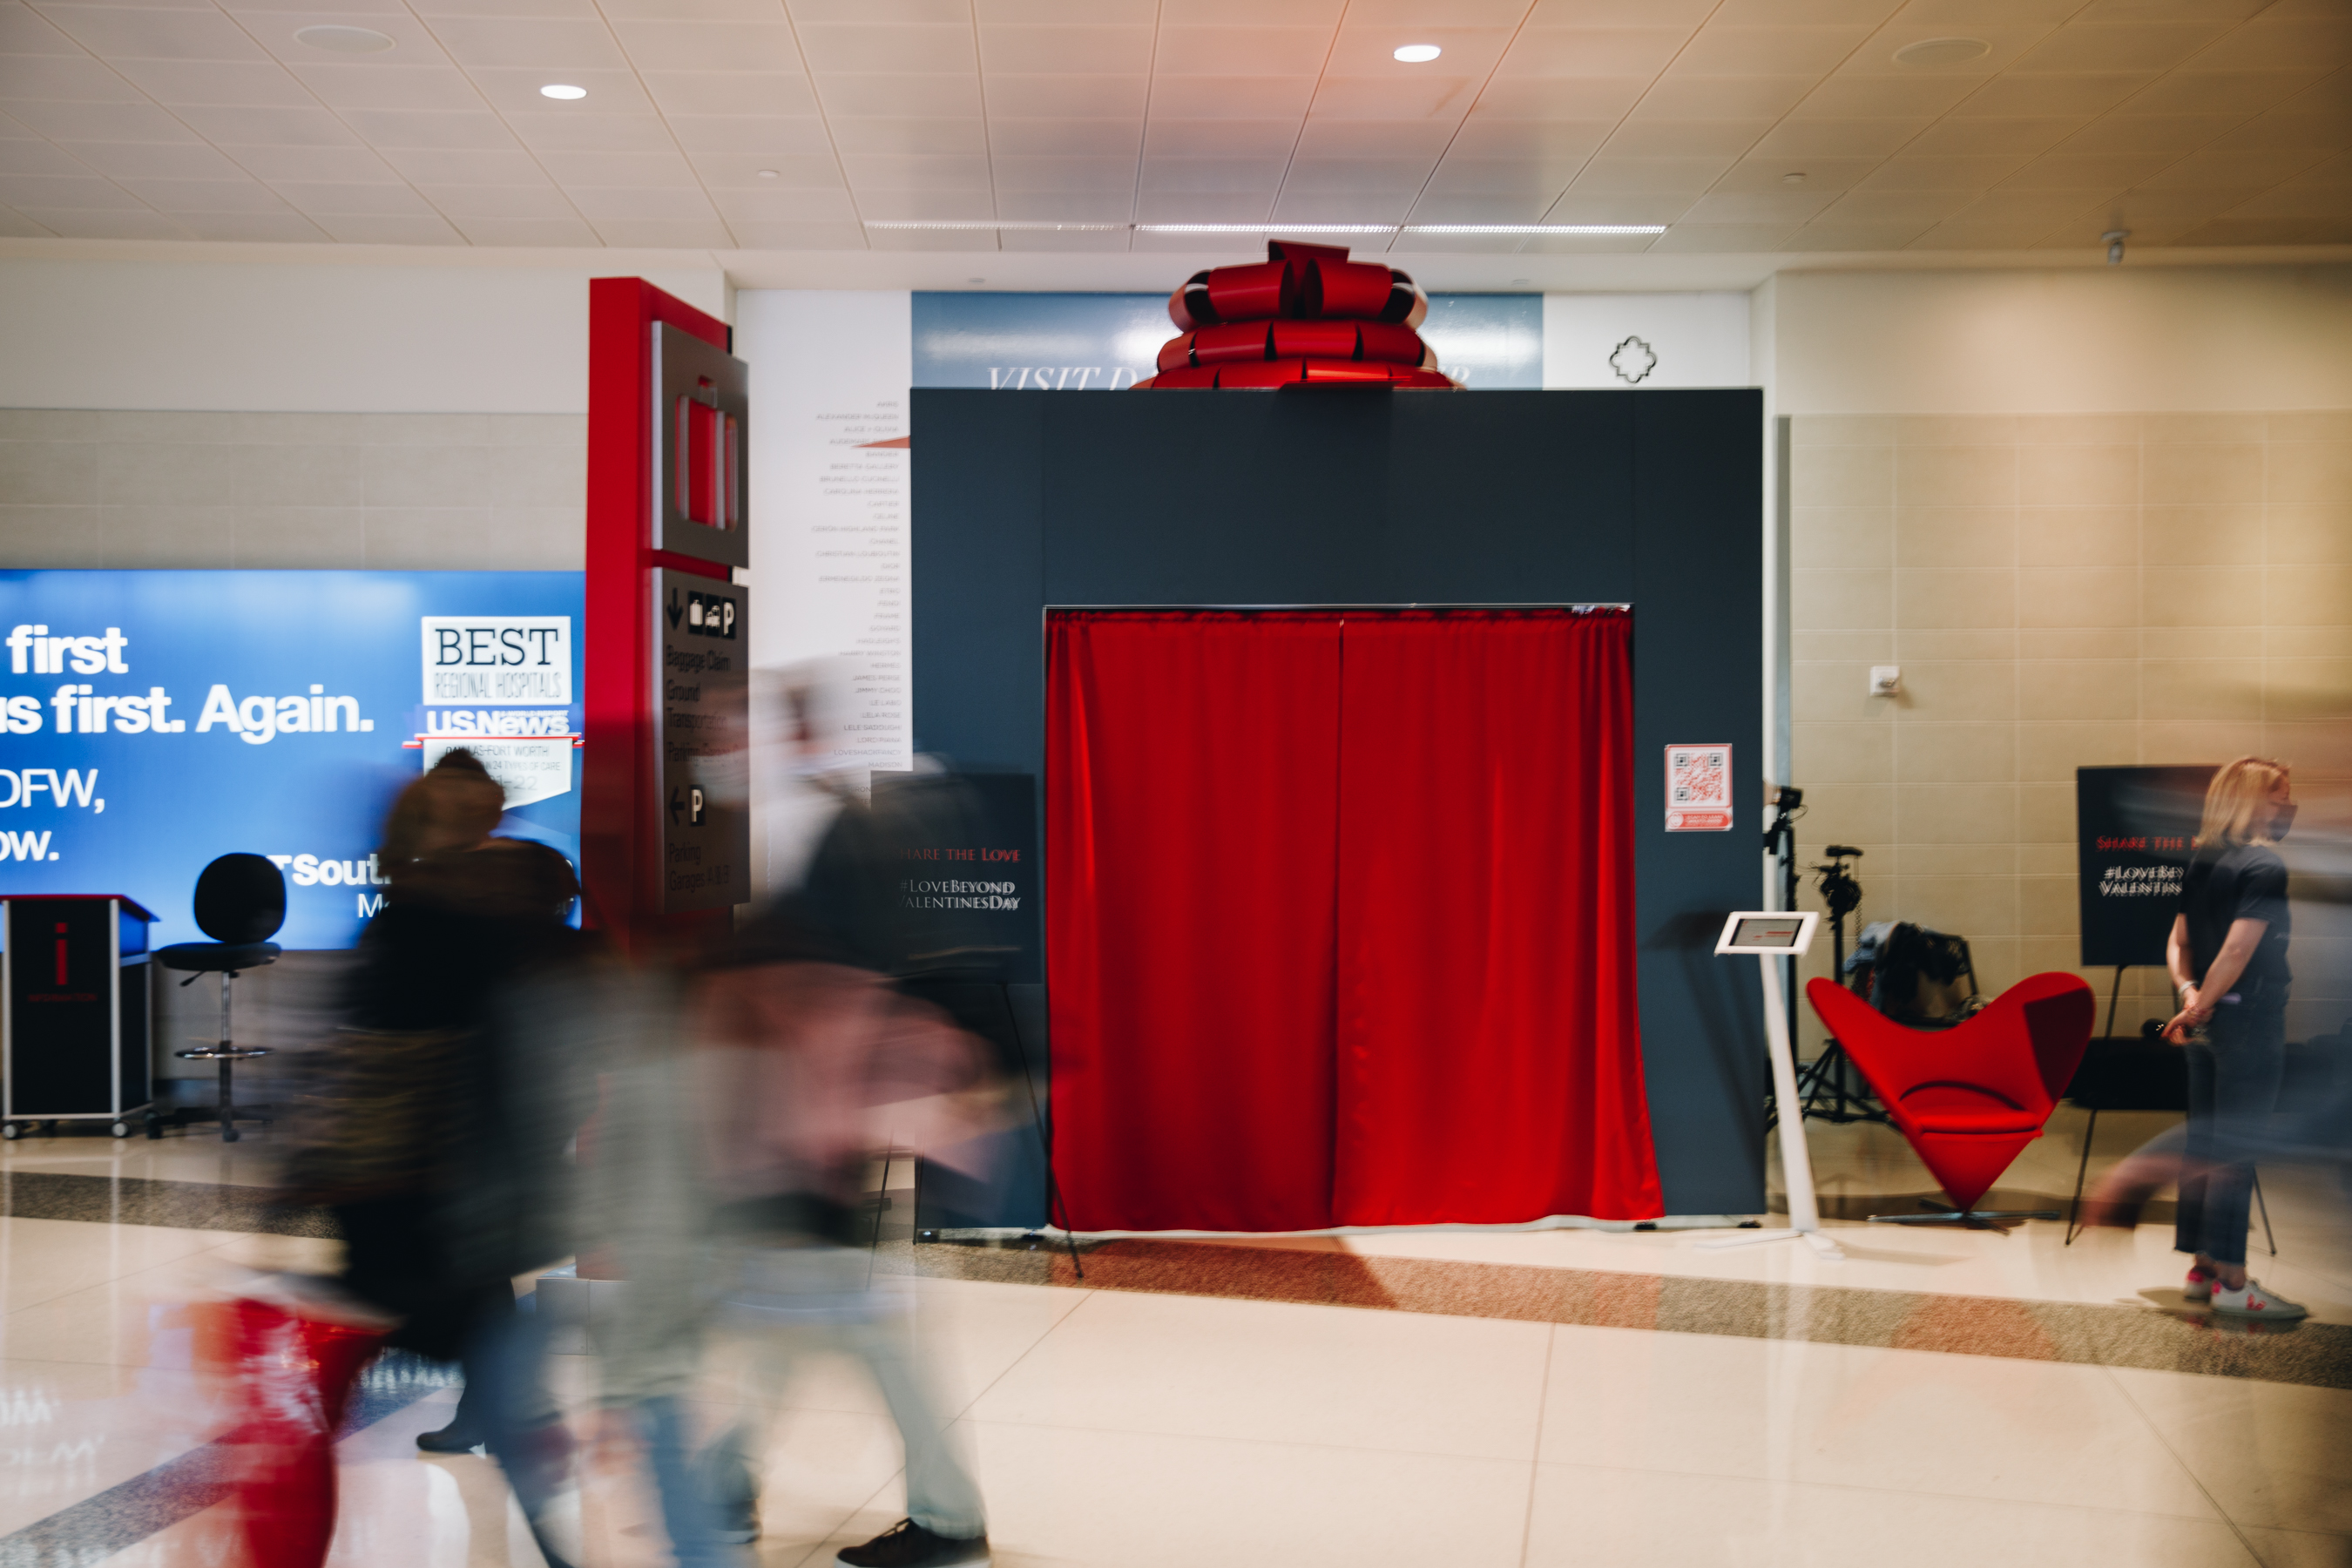 Love Beyond launches on Valentine’s Day with activations in Rockefeller Center in New York City, Dallas Love Field Airport, Mall of America in Minneapolis, and Alderwood Mall in Seattle